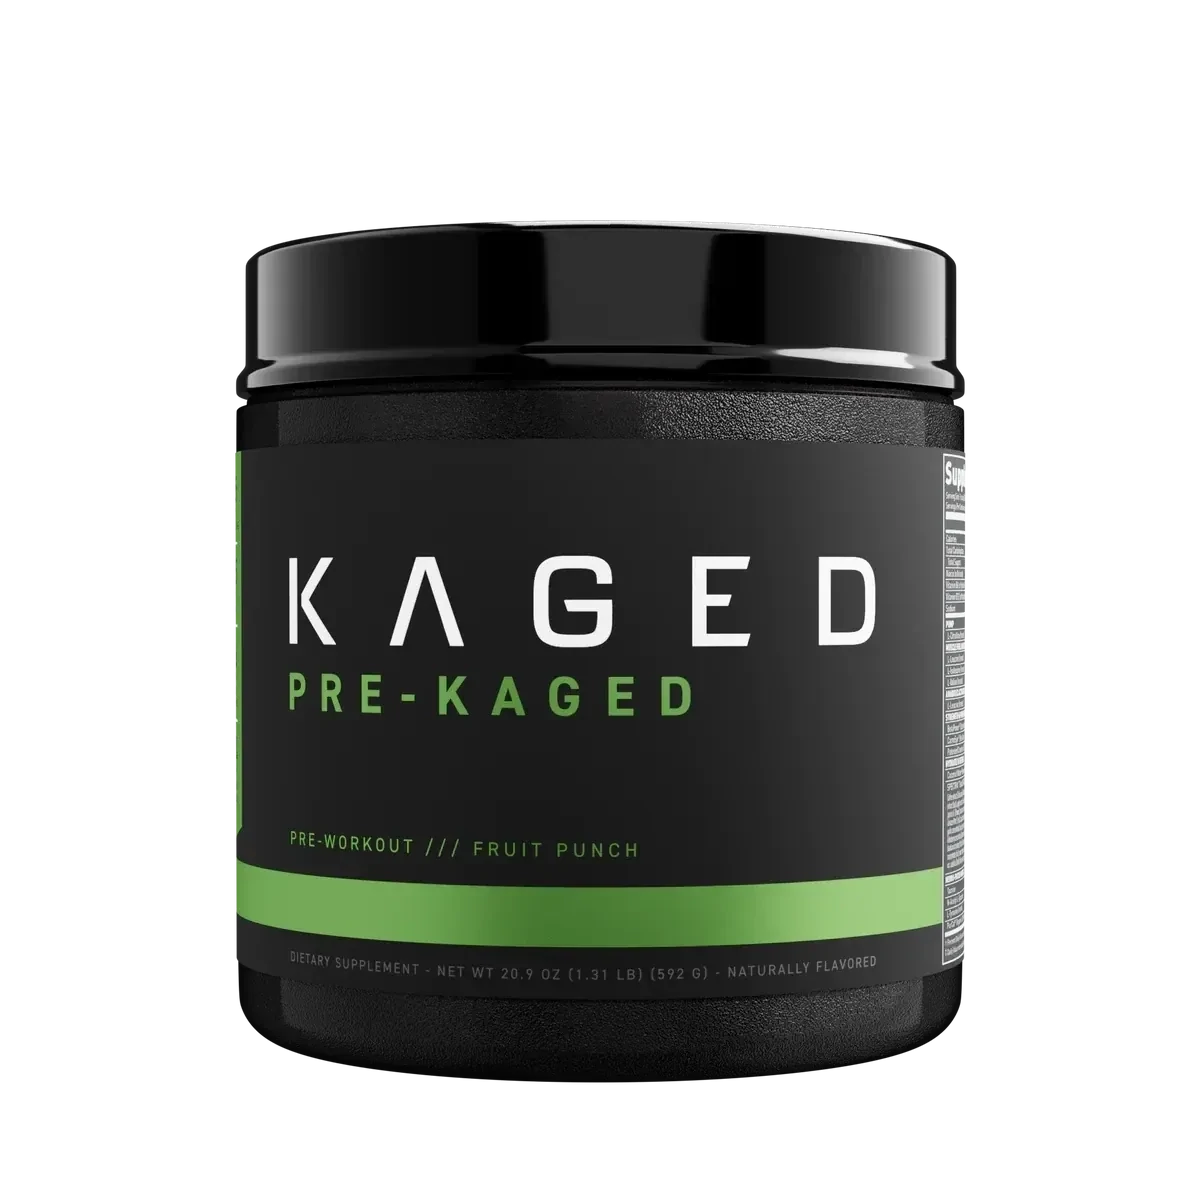 Kaged Supplements Pre-Kaged Pre-Workout